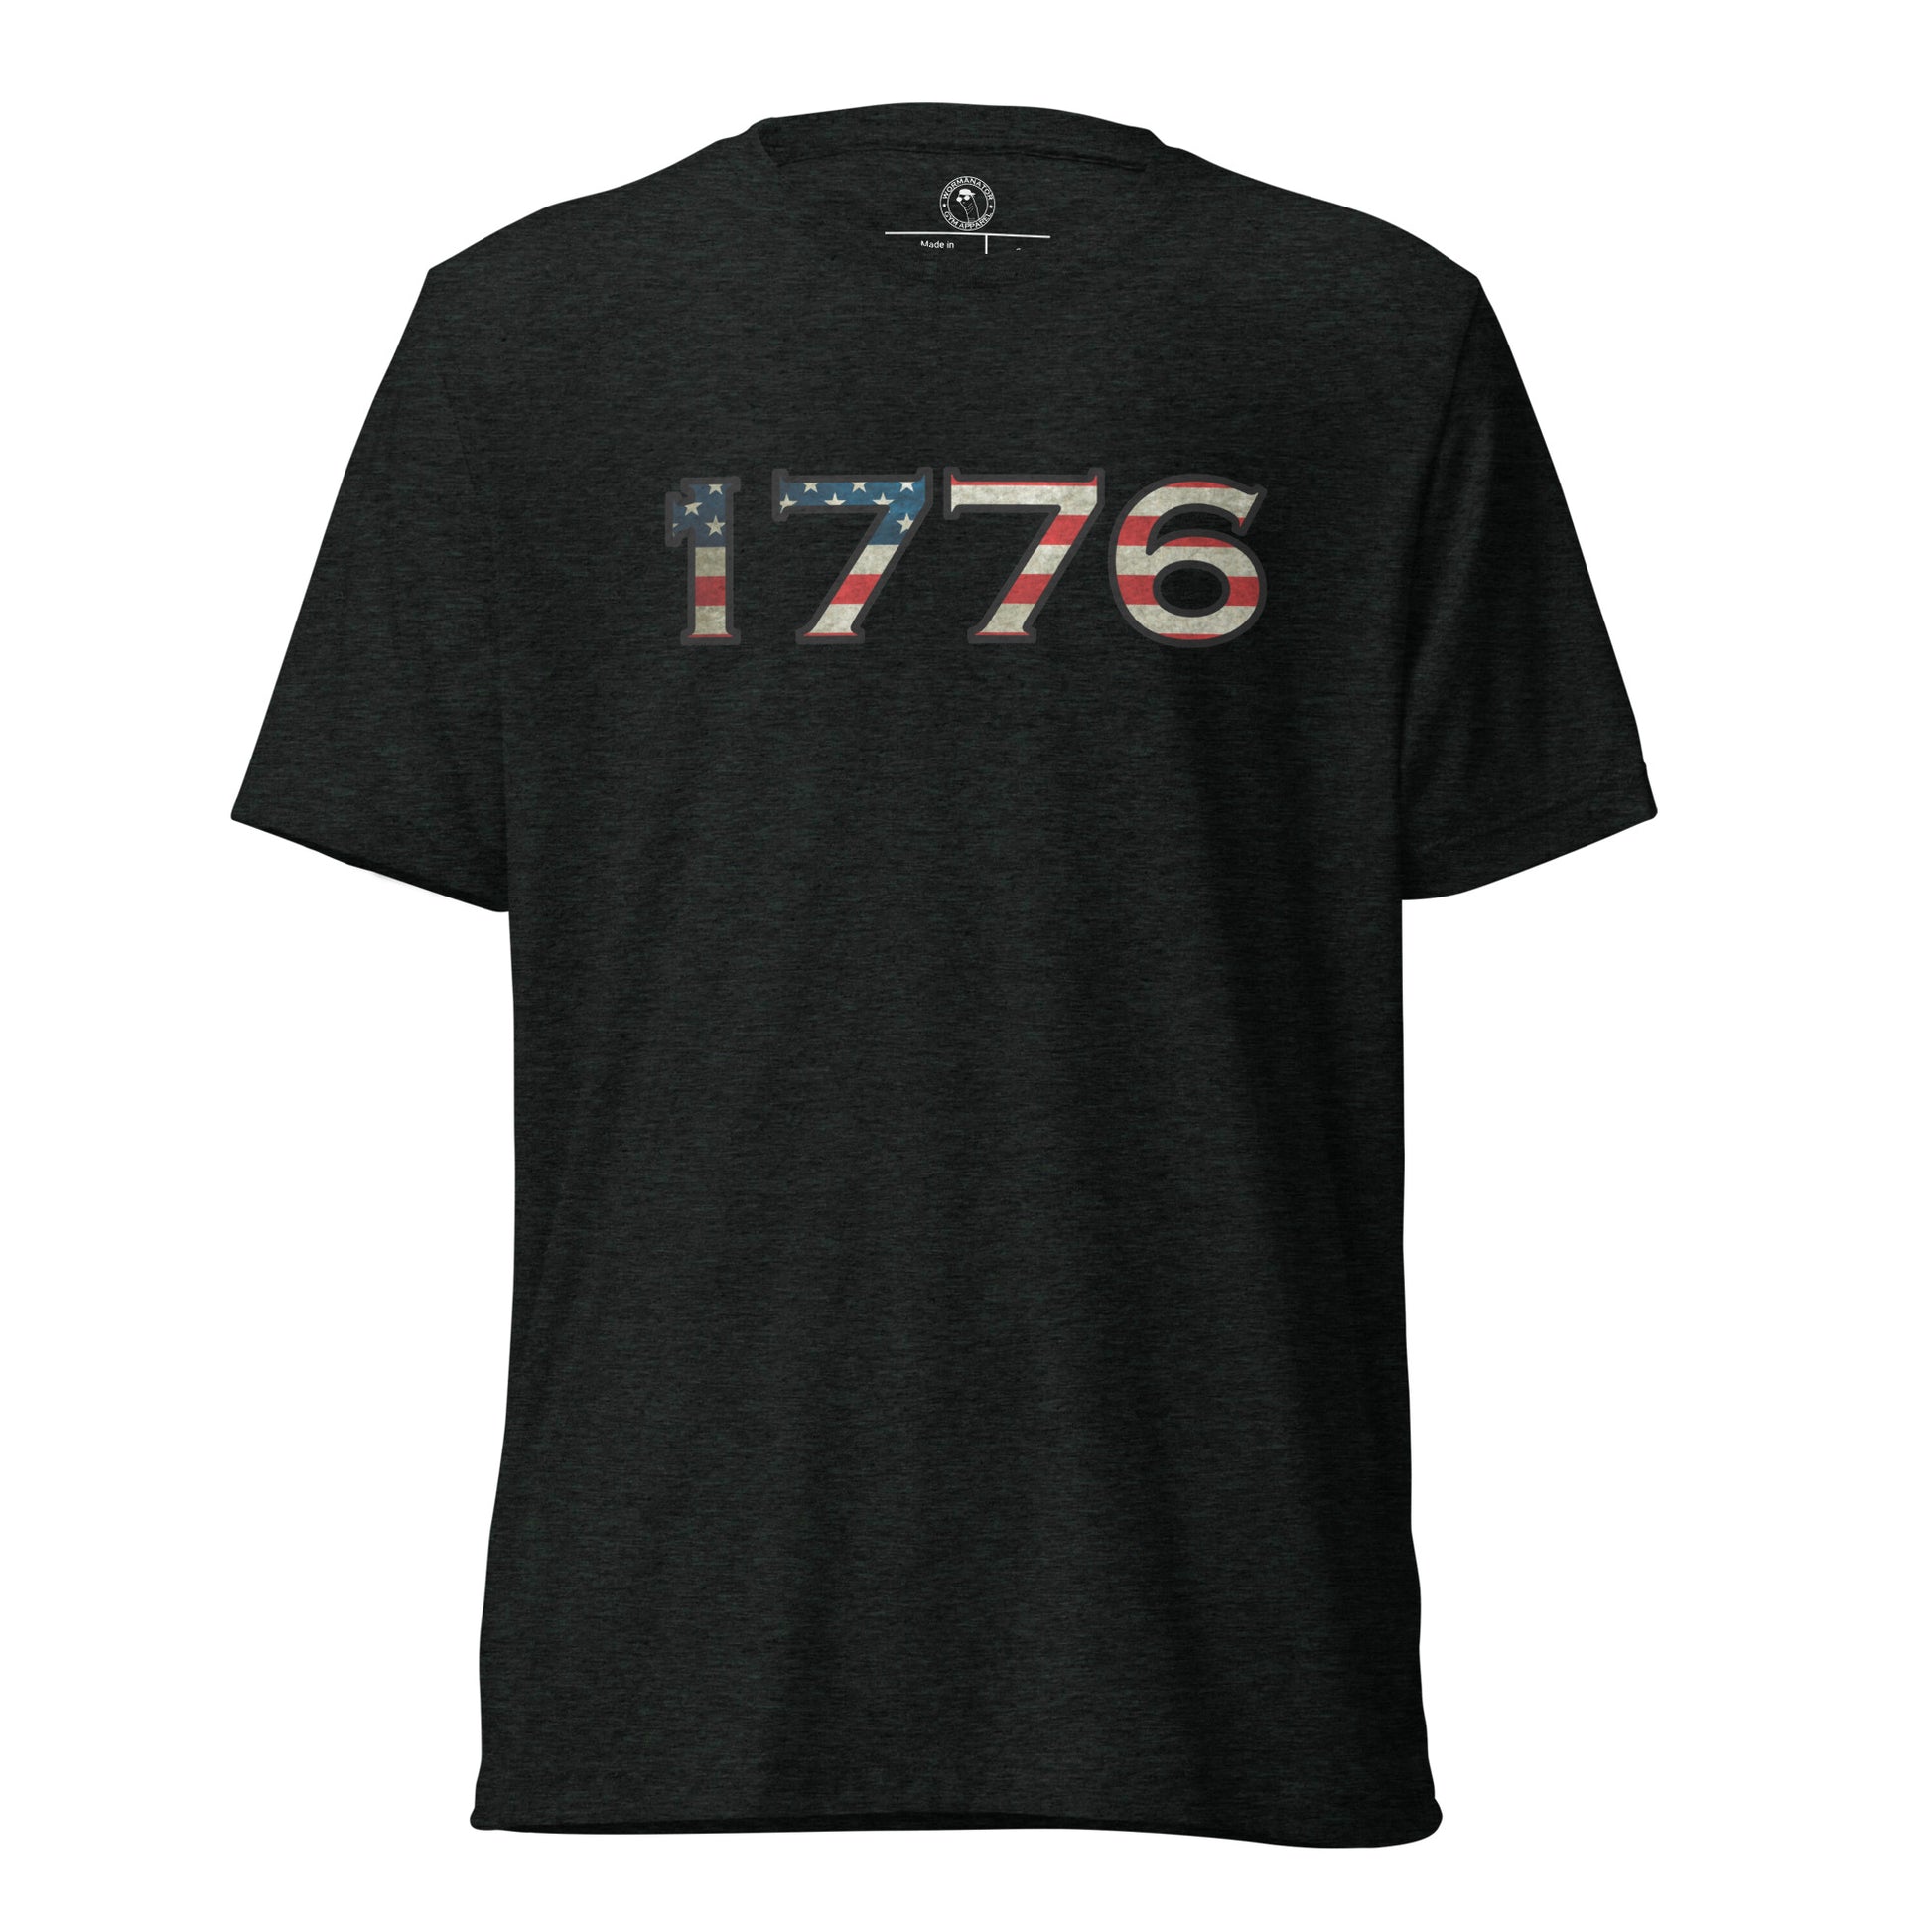 1776 T-Shirt in Charcoal Black Triblend